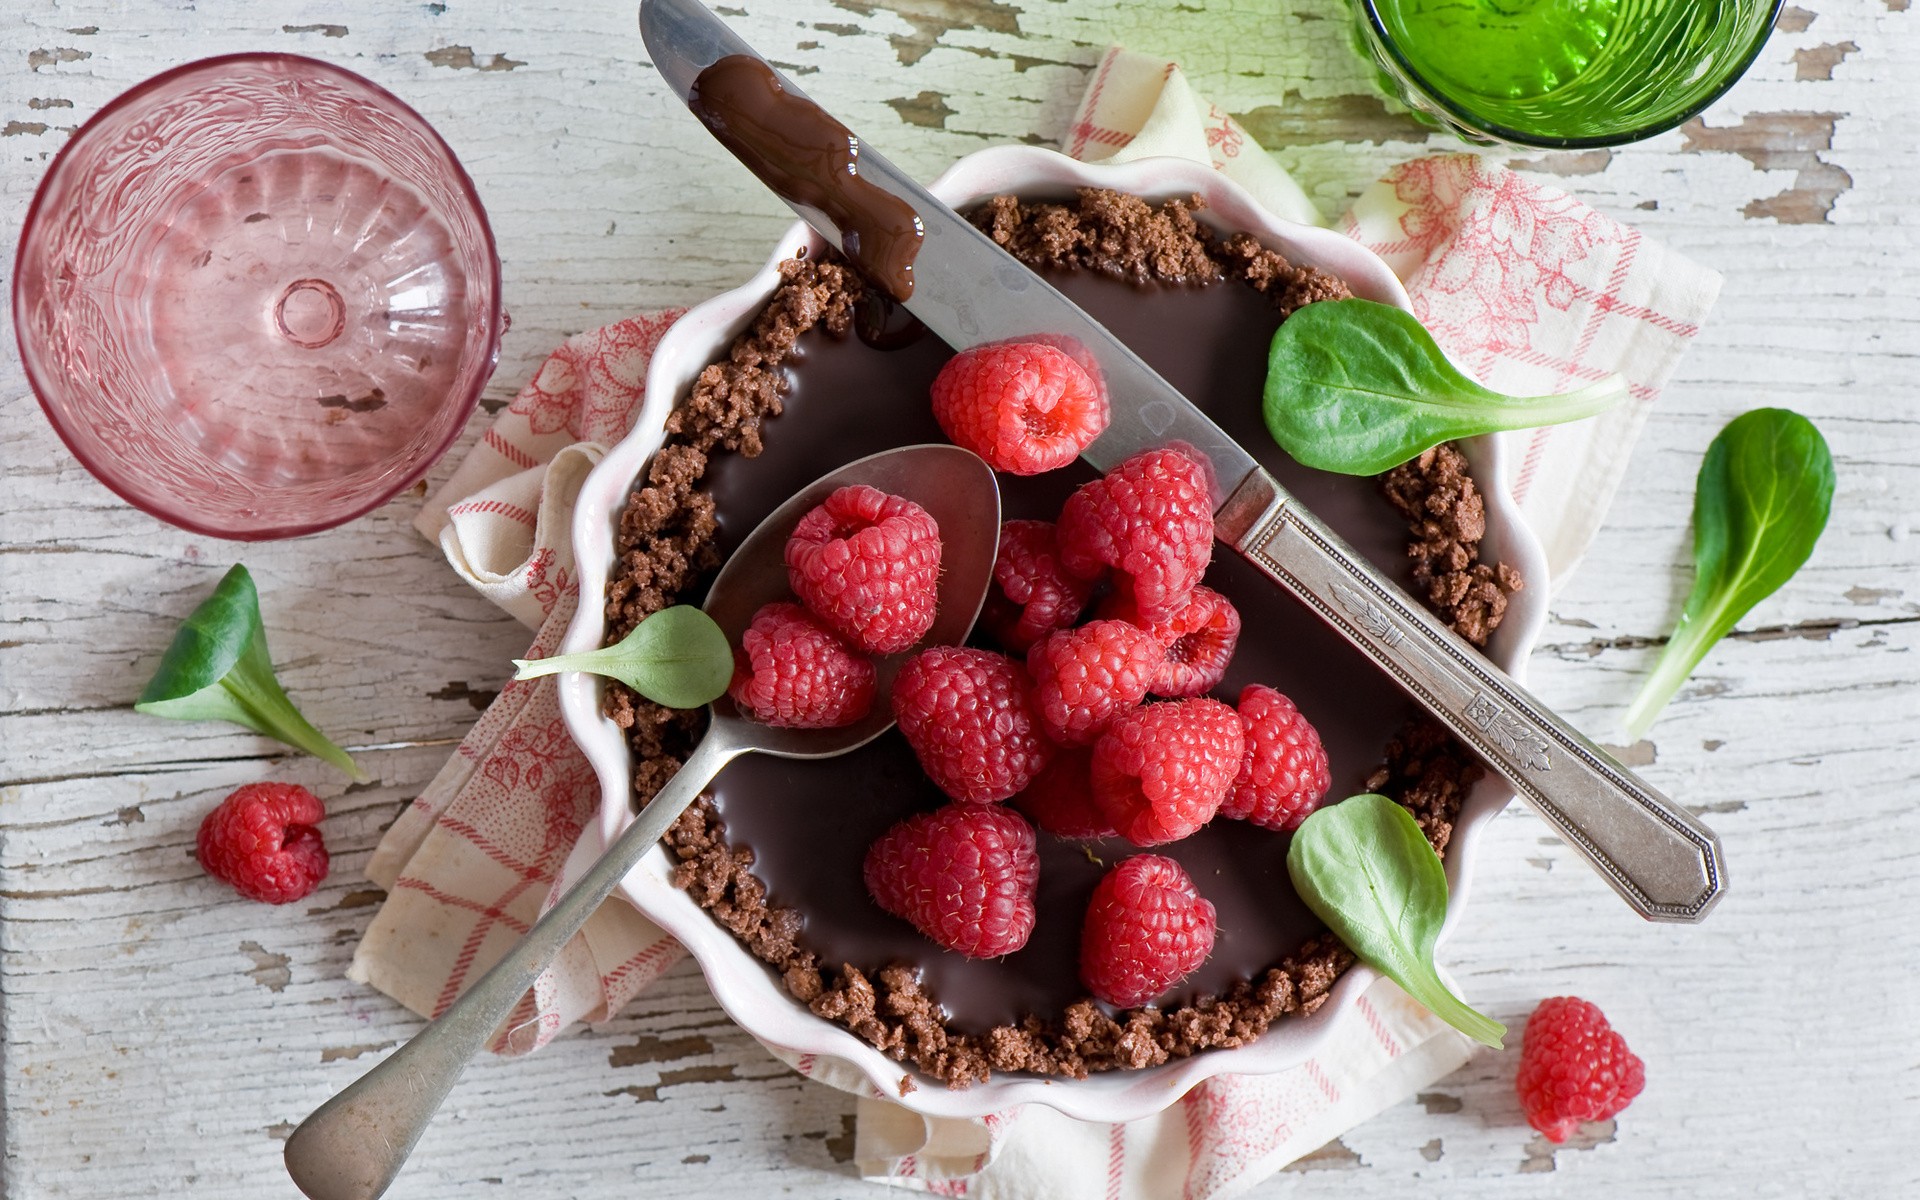 Food Lunch Colorful Birds Eye View Dessert Raspberries Cutlery Wooden Surface 1920x1200